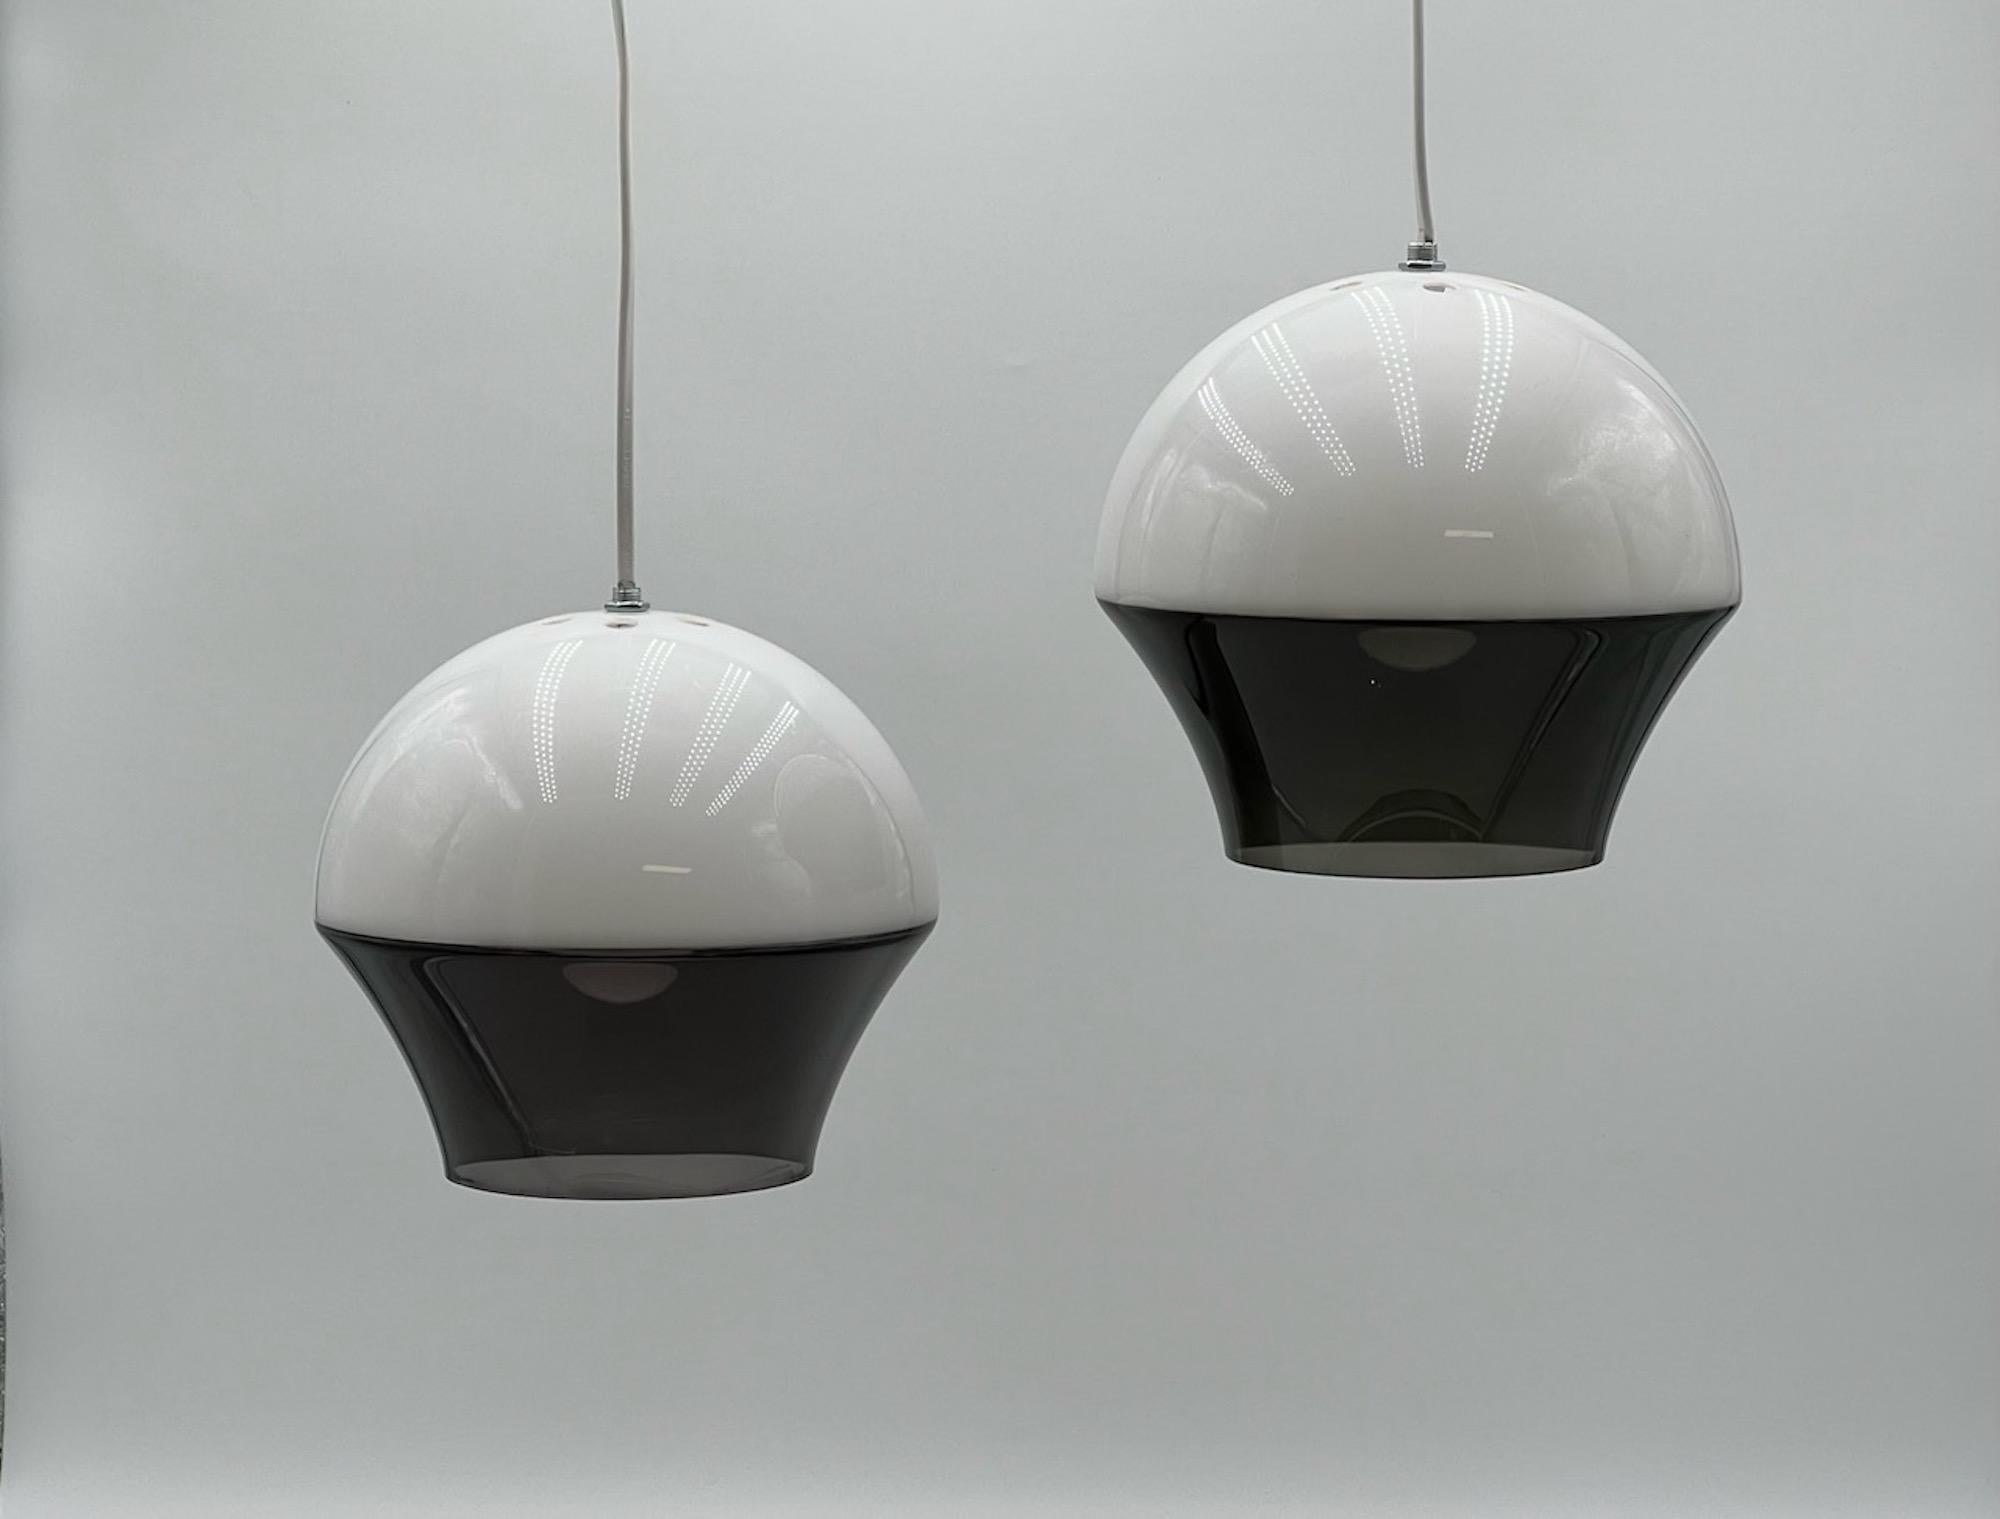 Pair of space age pendant lamps made of two-color acrylic material in Italy in the 70s.

The lampshade is made of a white half globe and a grey translucent light diffuser. The overall shape reminds a flying saucer, giving this set a powerful and